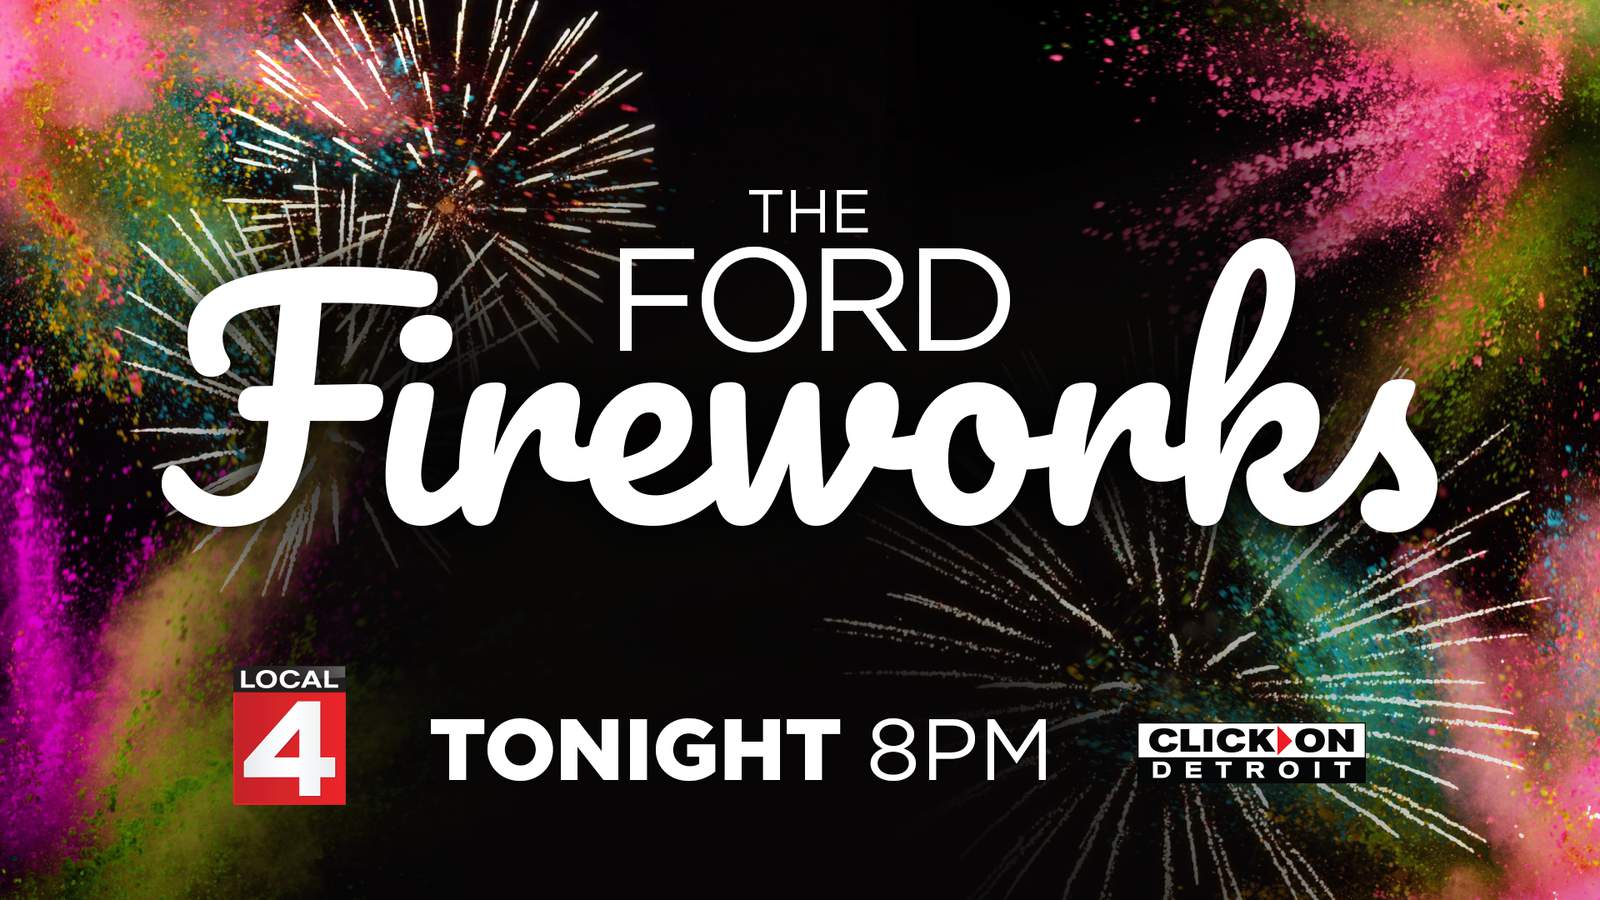 ‘The Ford Fireworks’ blasts off as televised-only event on Local 4